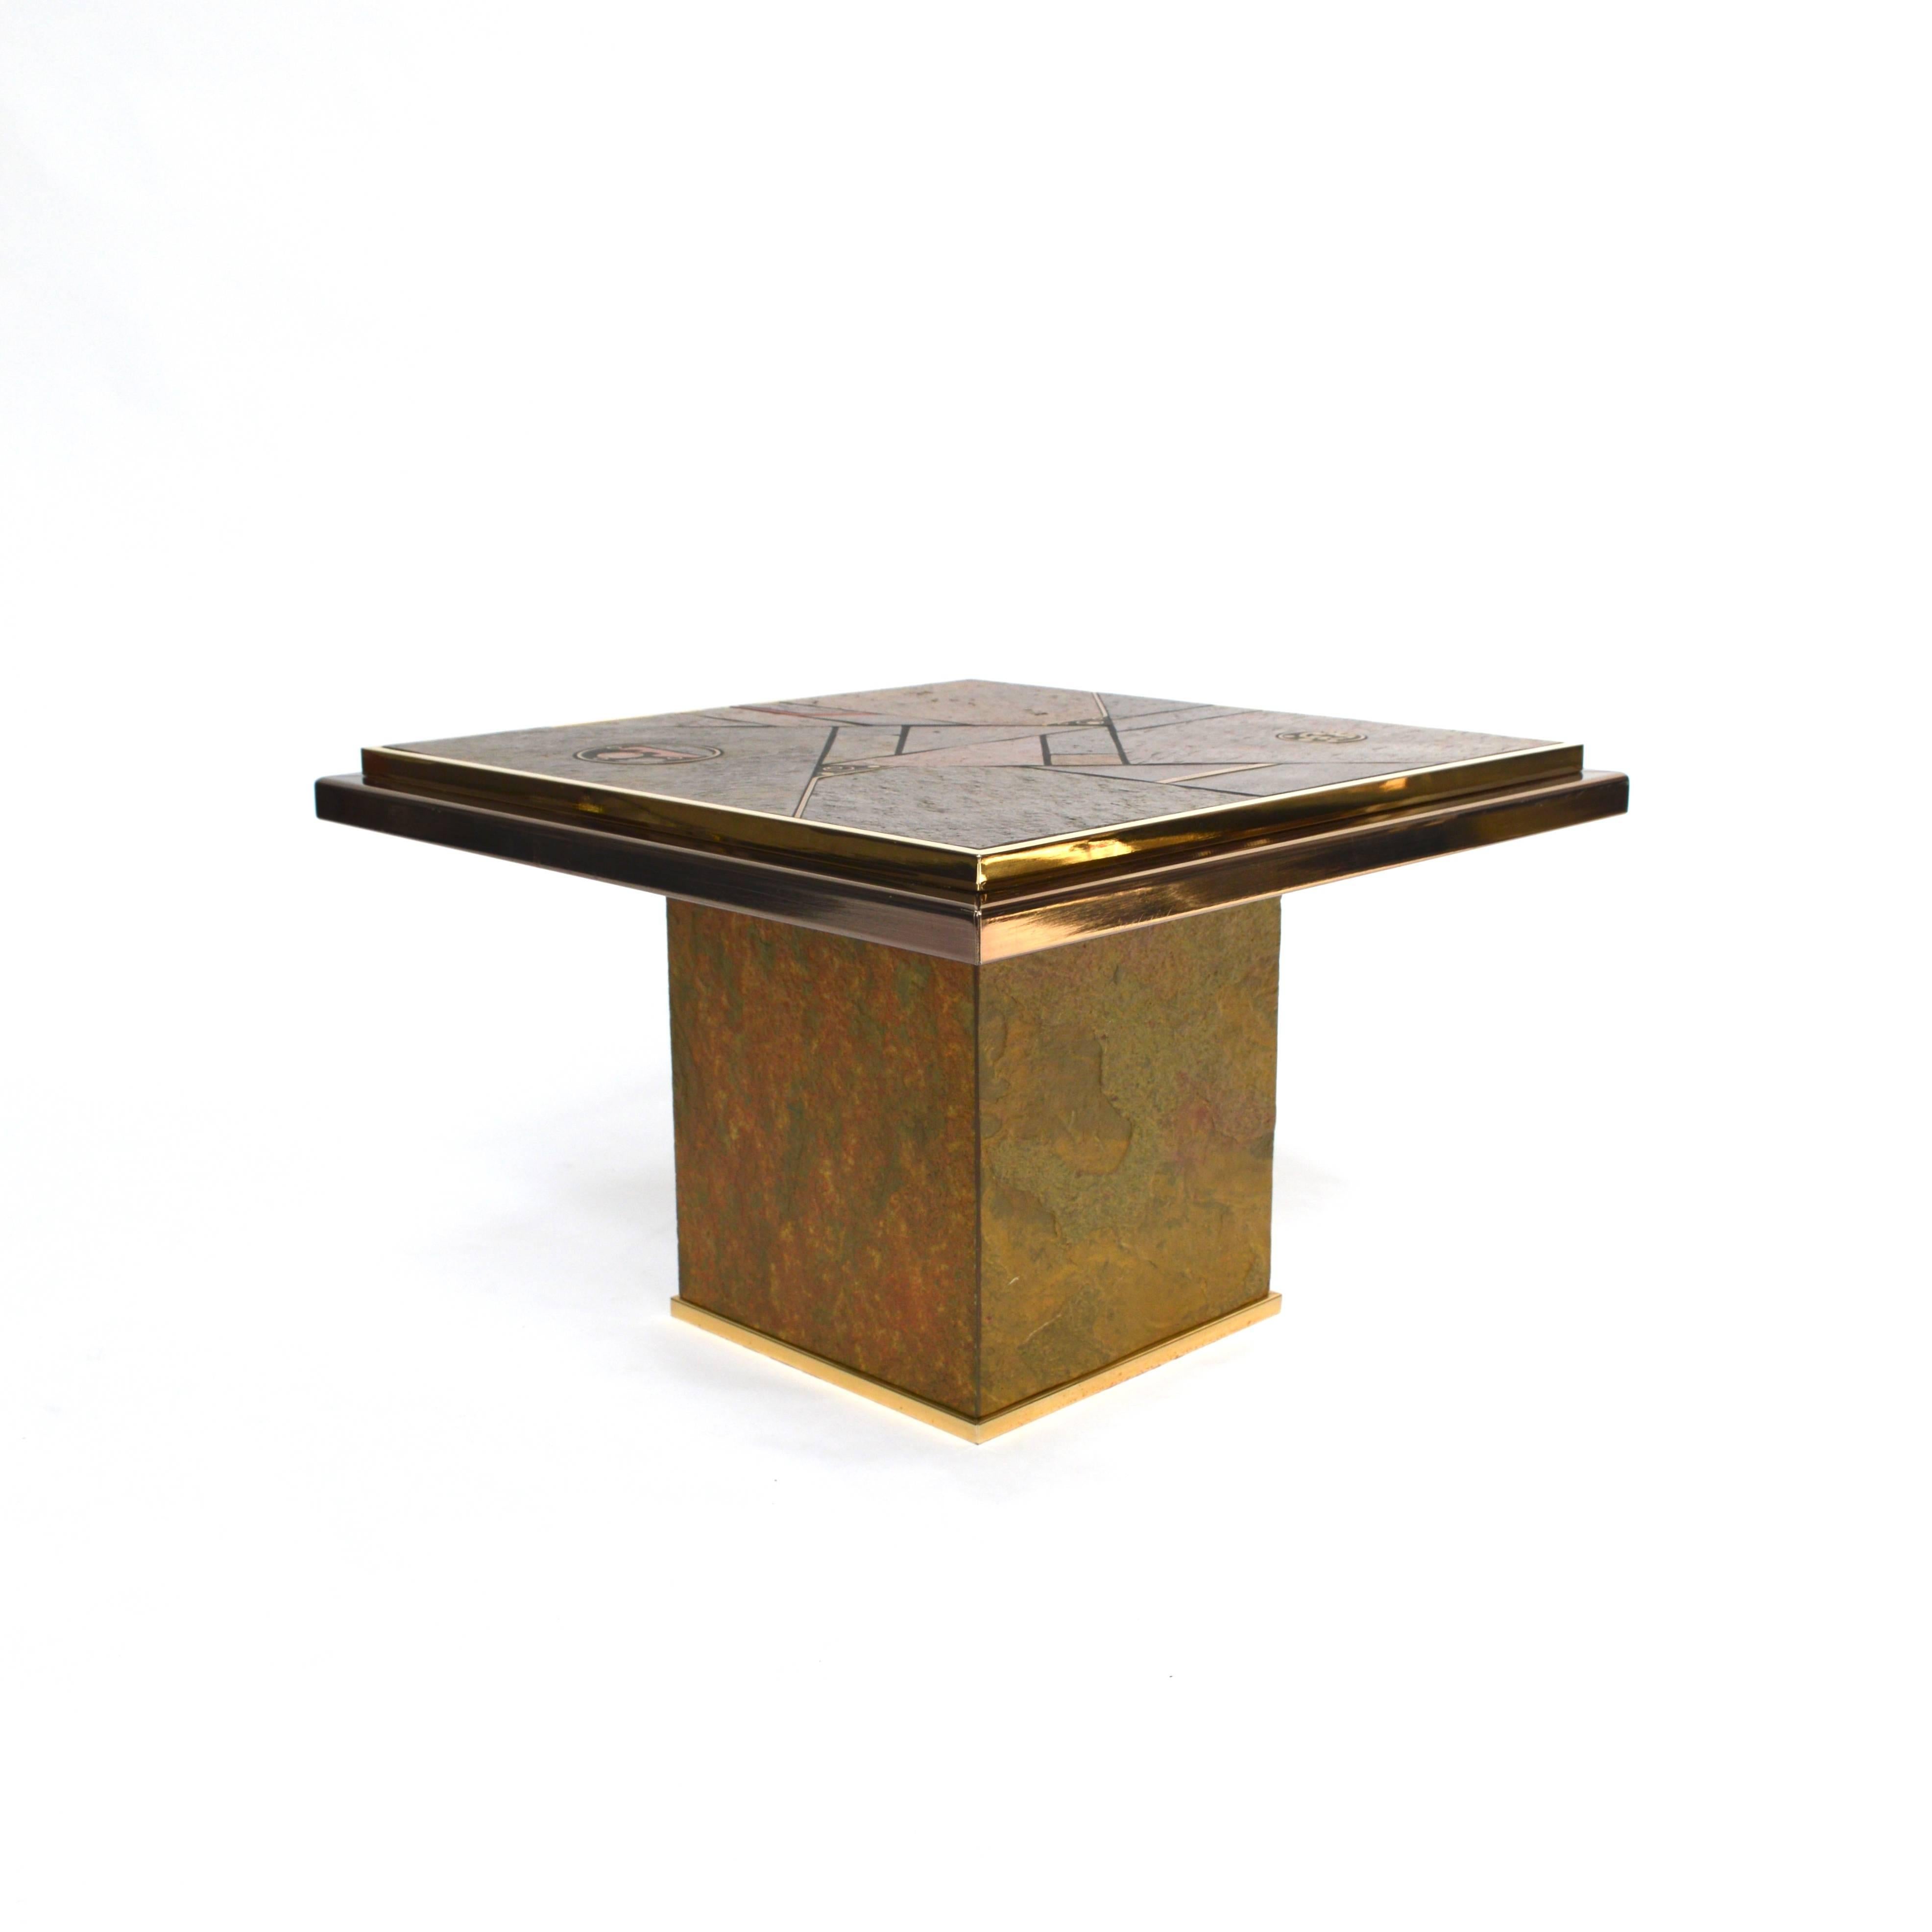 Brutalist side or coffee table in the style of Paul Kingma and manufactured by Fedam. It has a beautiful slate stone and brass mosaic top and brass edges. The sides of the base are also covered with slate.
In very good to excellent condition. A